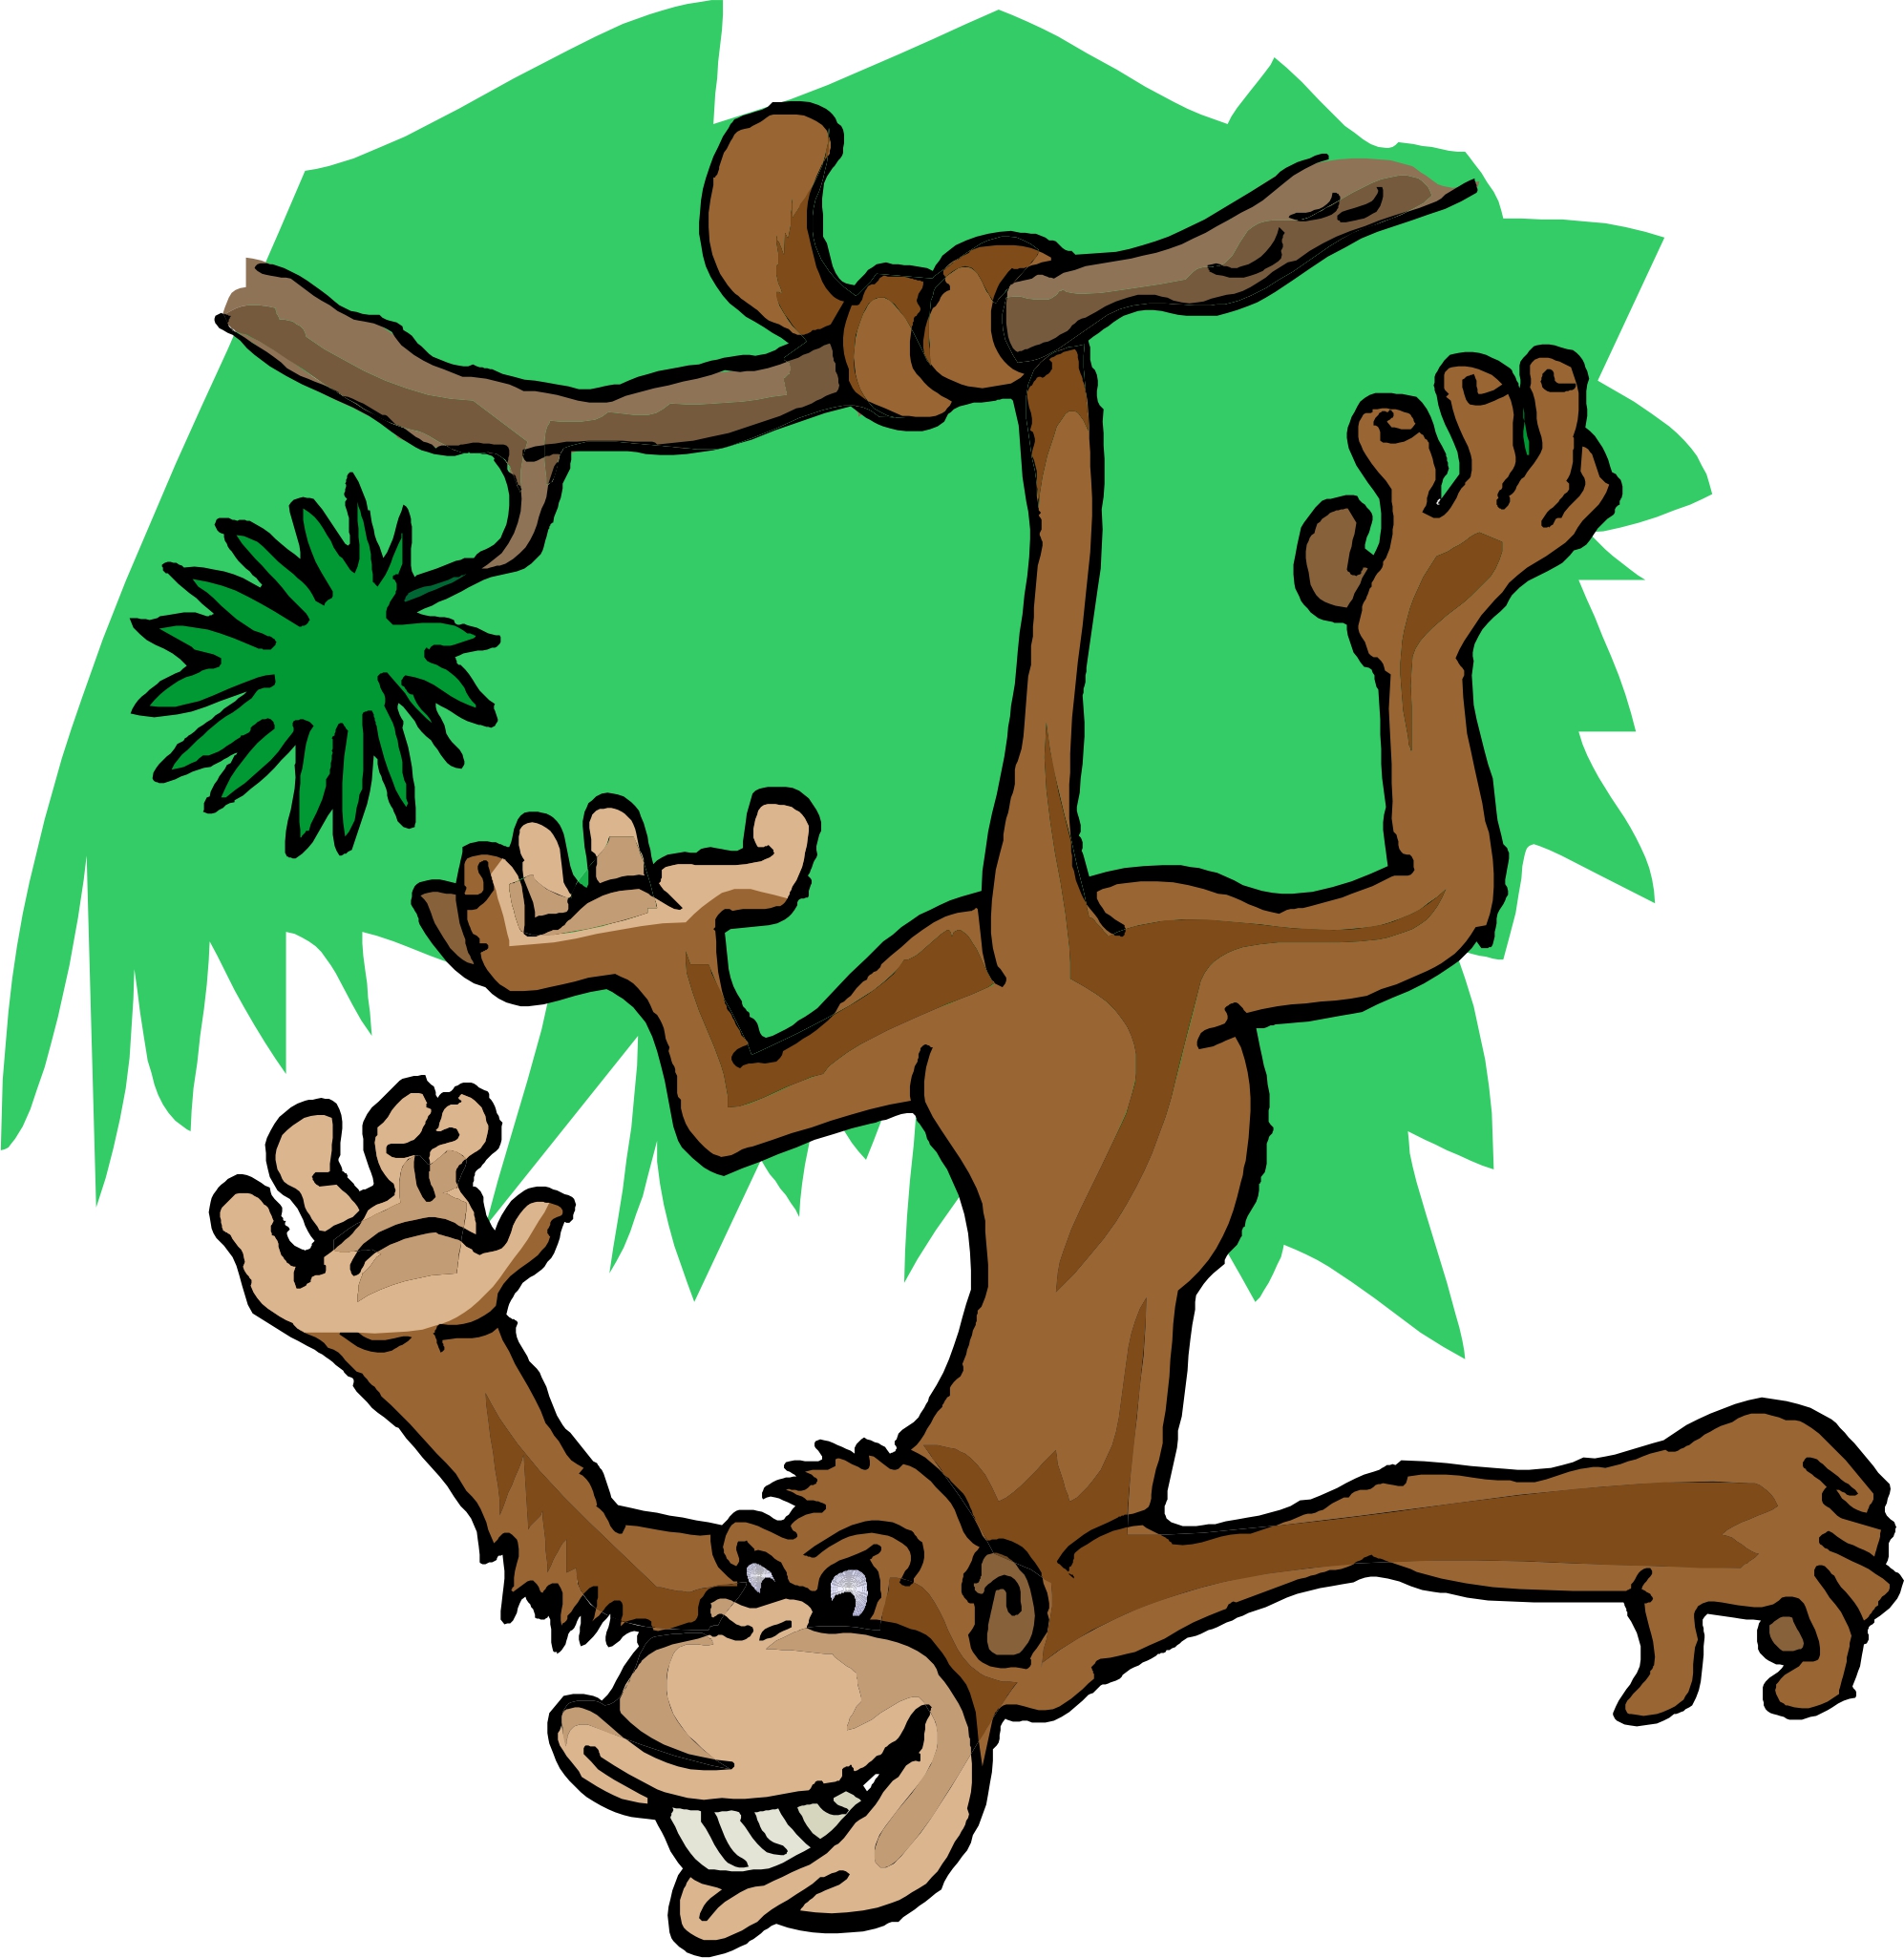 Monkey In A Tree Clipart   Clipart Panda   Free Clipart Images